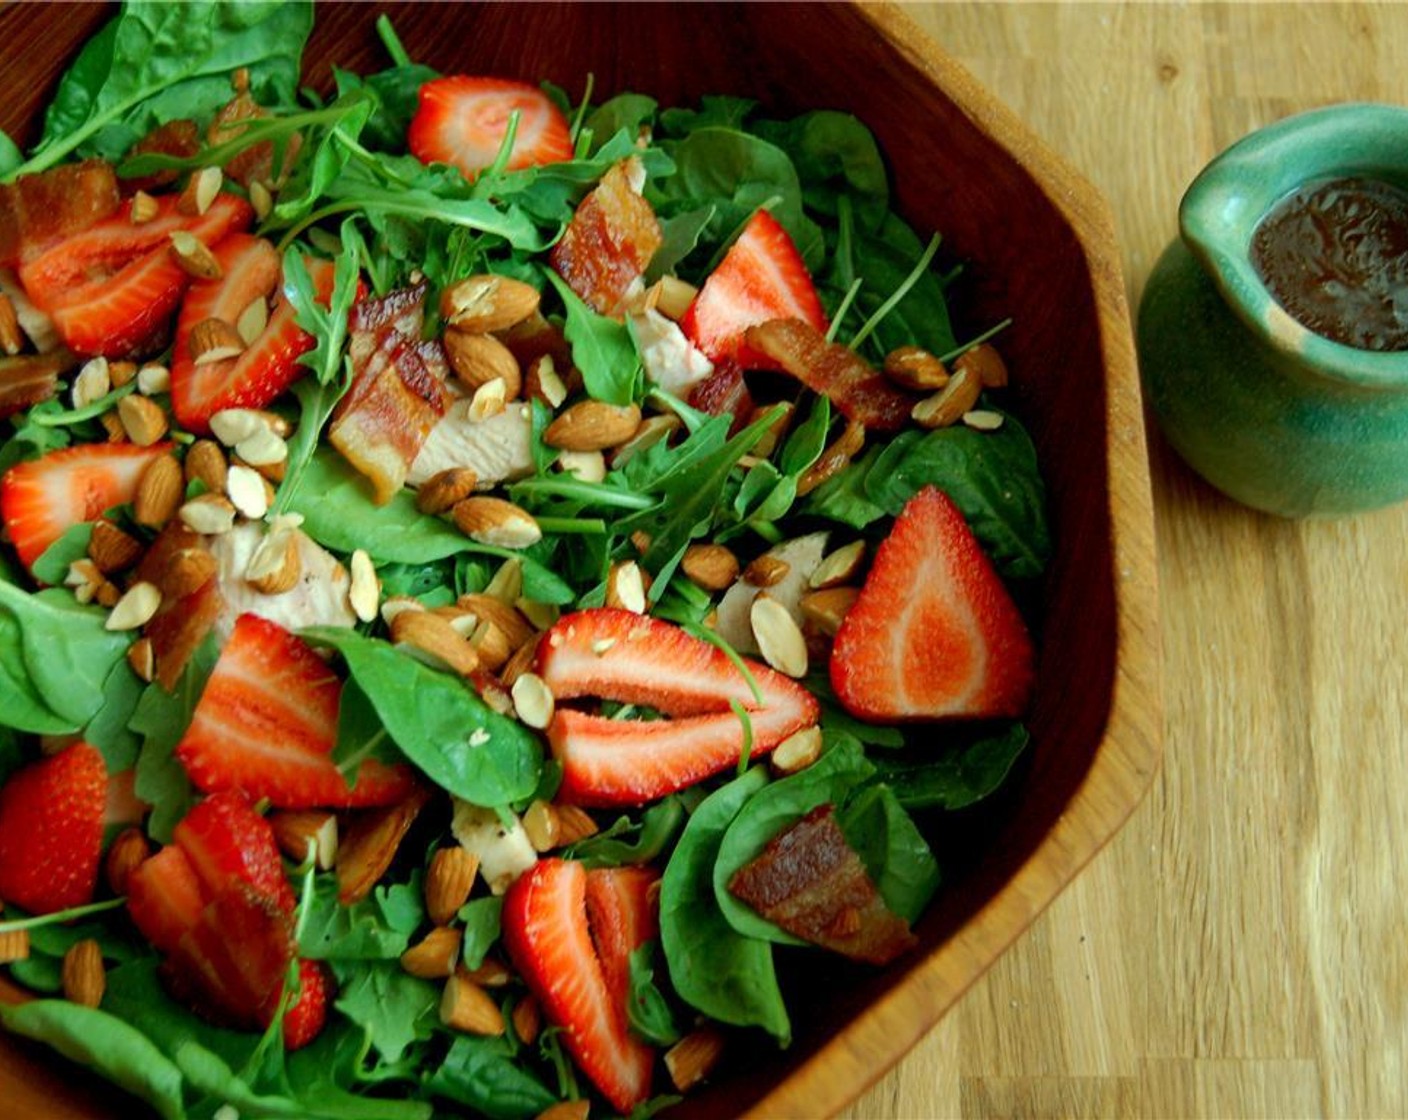 step 5 Mix together the Fresh Baby Spinach (2 cups), Arugula (2 cups), Fresh Strawberries (2 cups), chicken, bacon and Almonds (1/2 cup).